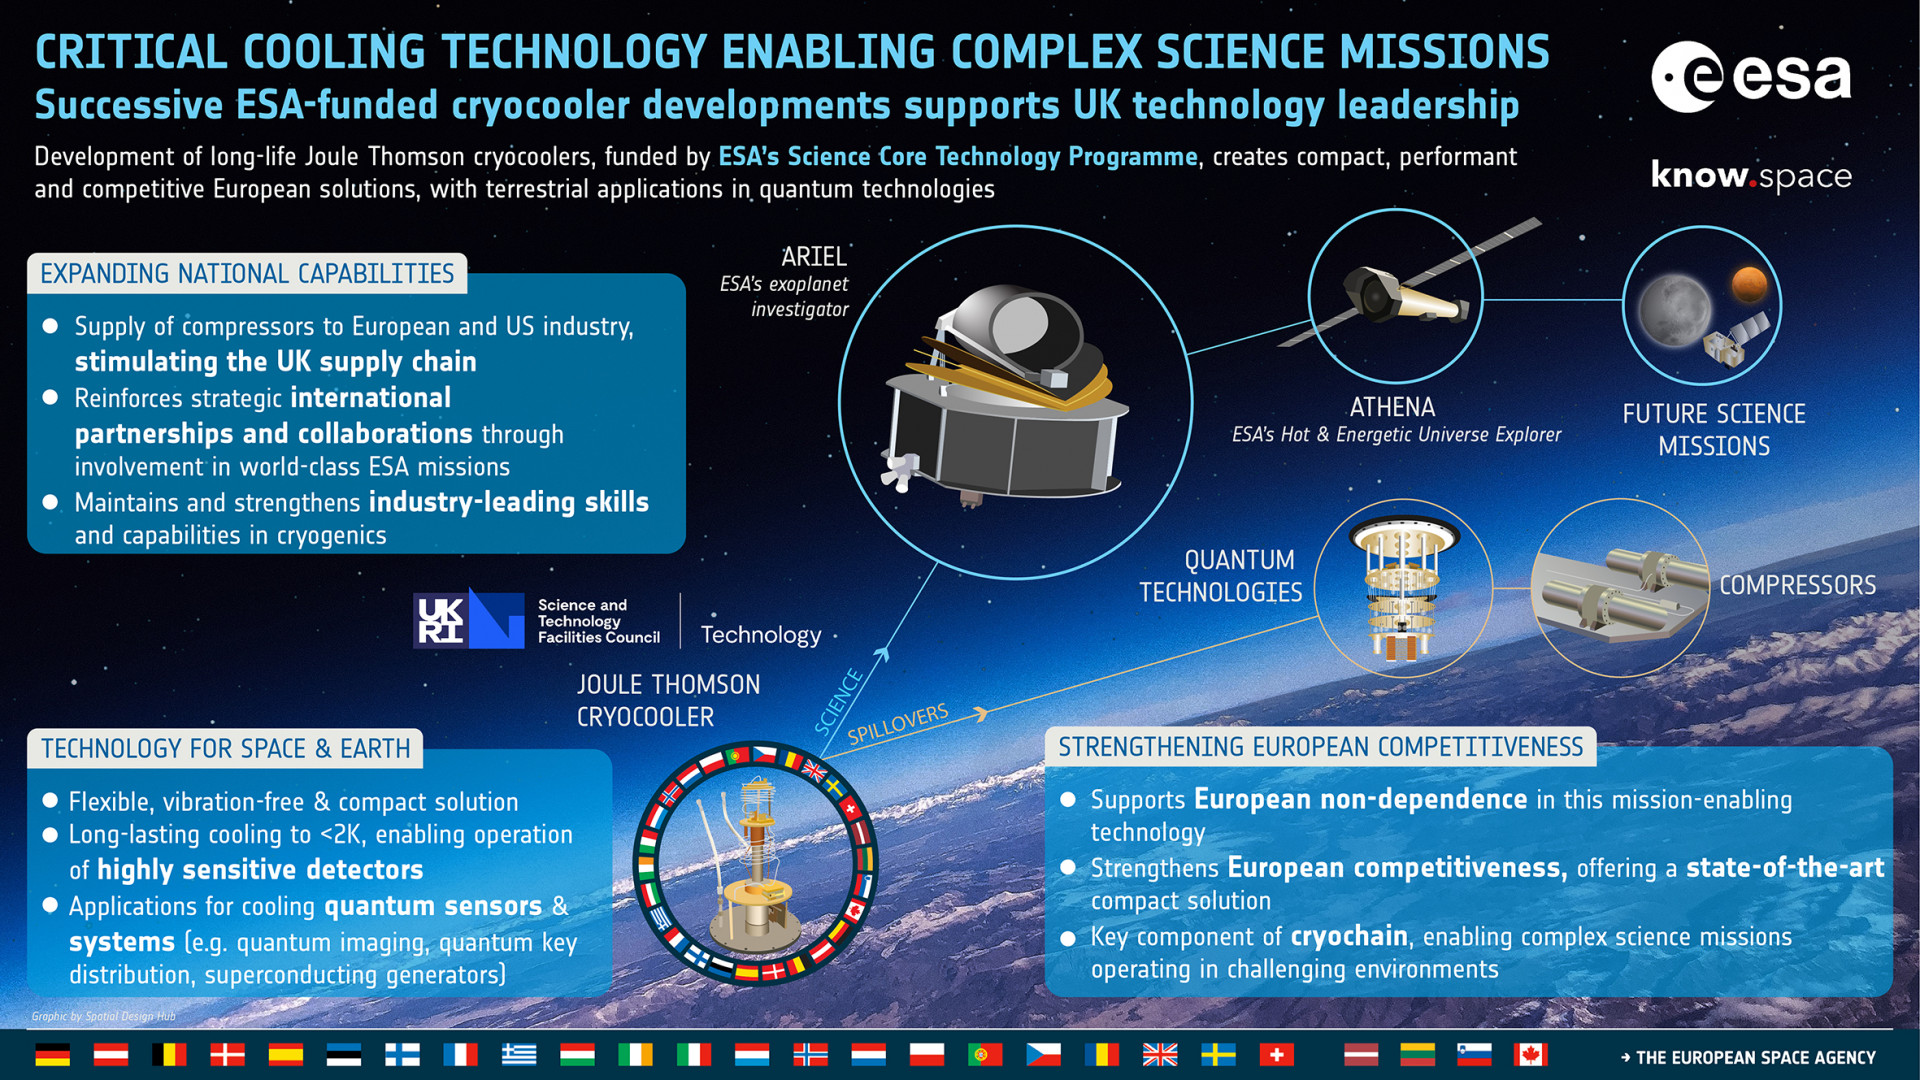 ESA Science Core Technology Development Success Story - Critical Cooling Technology Enabling Complex Science Missions